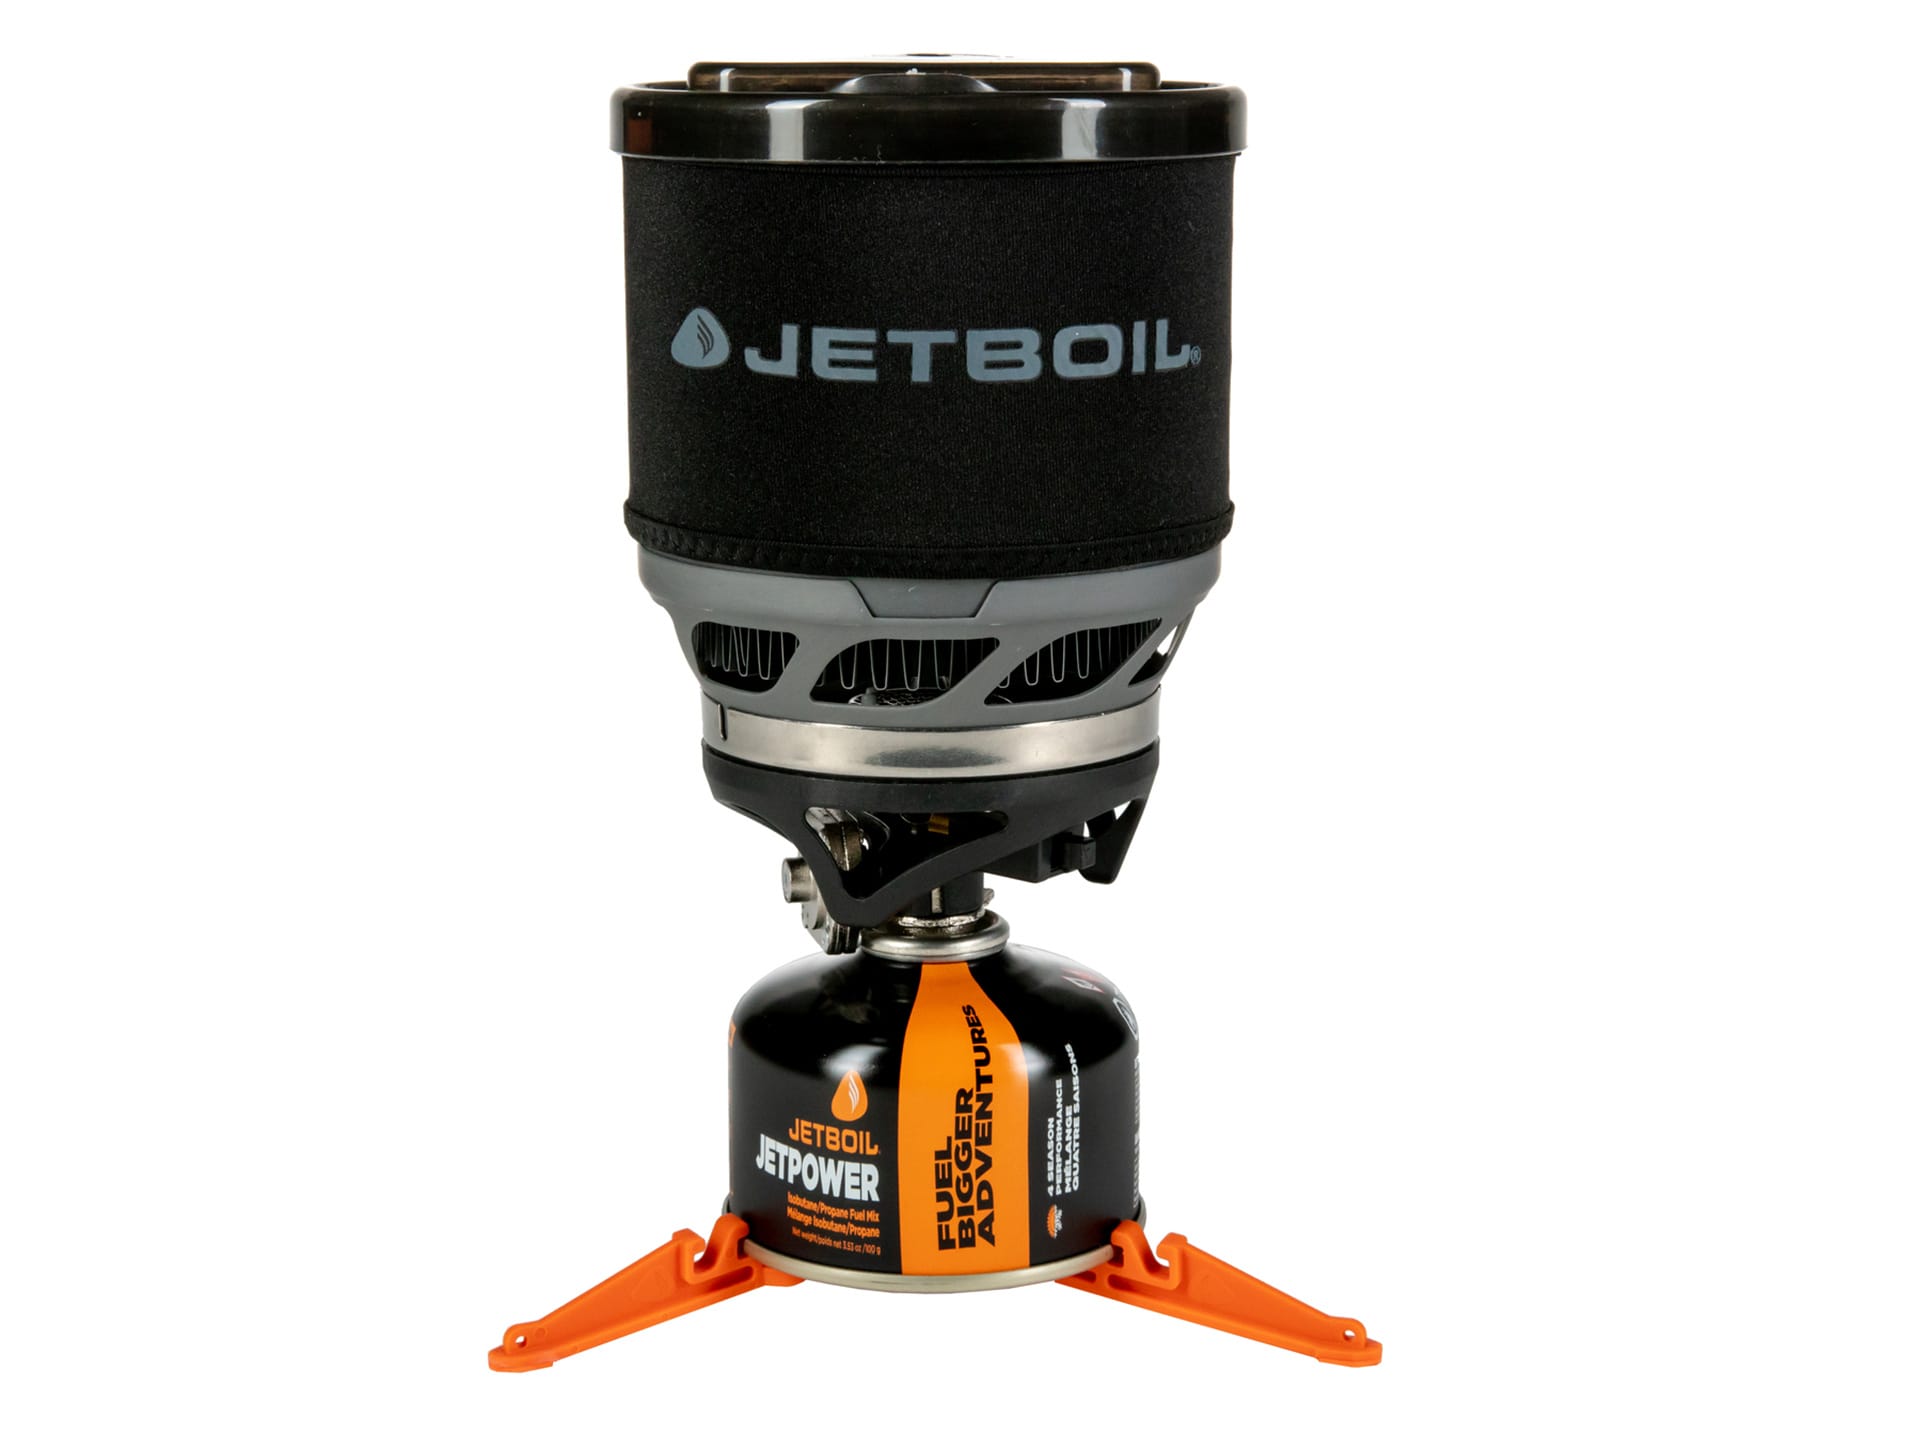 Jetboil Minimo Cooking Pot Camp Stove - Review